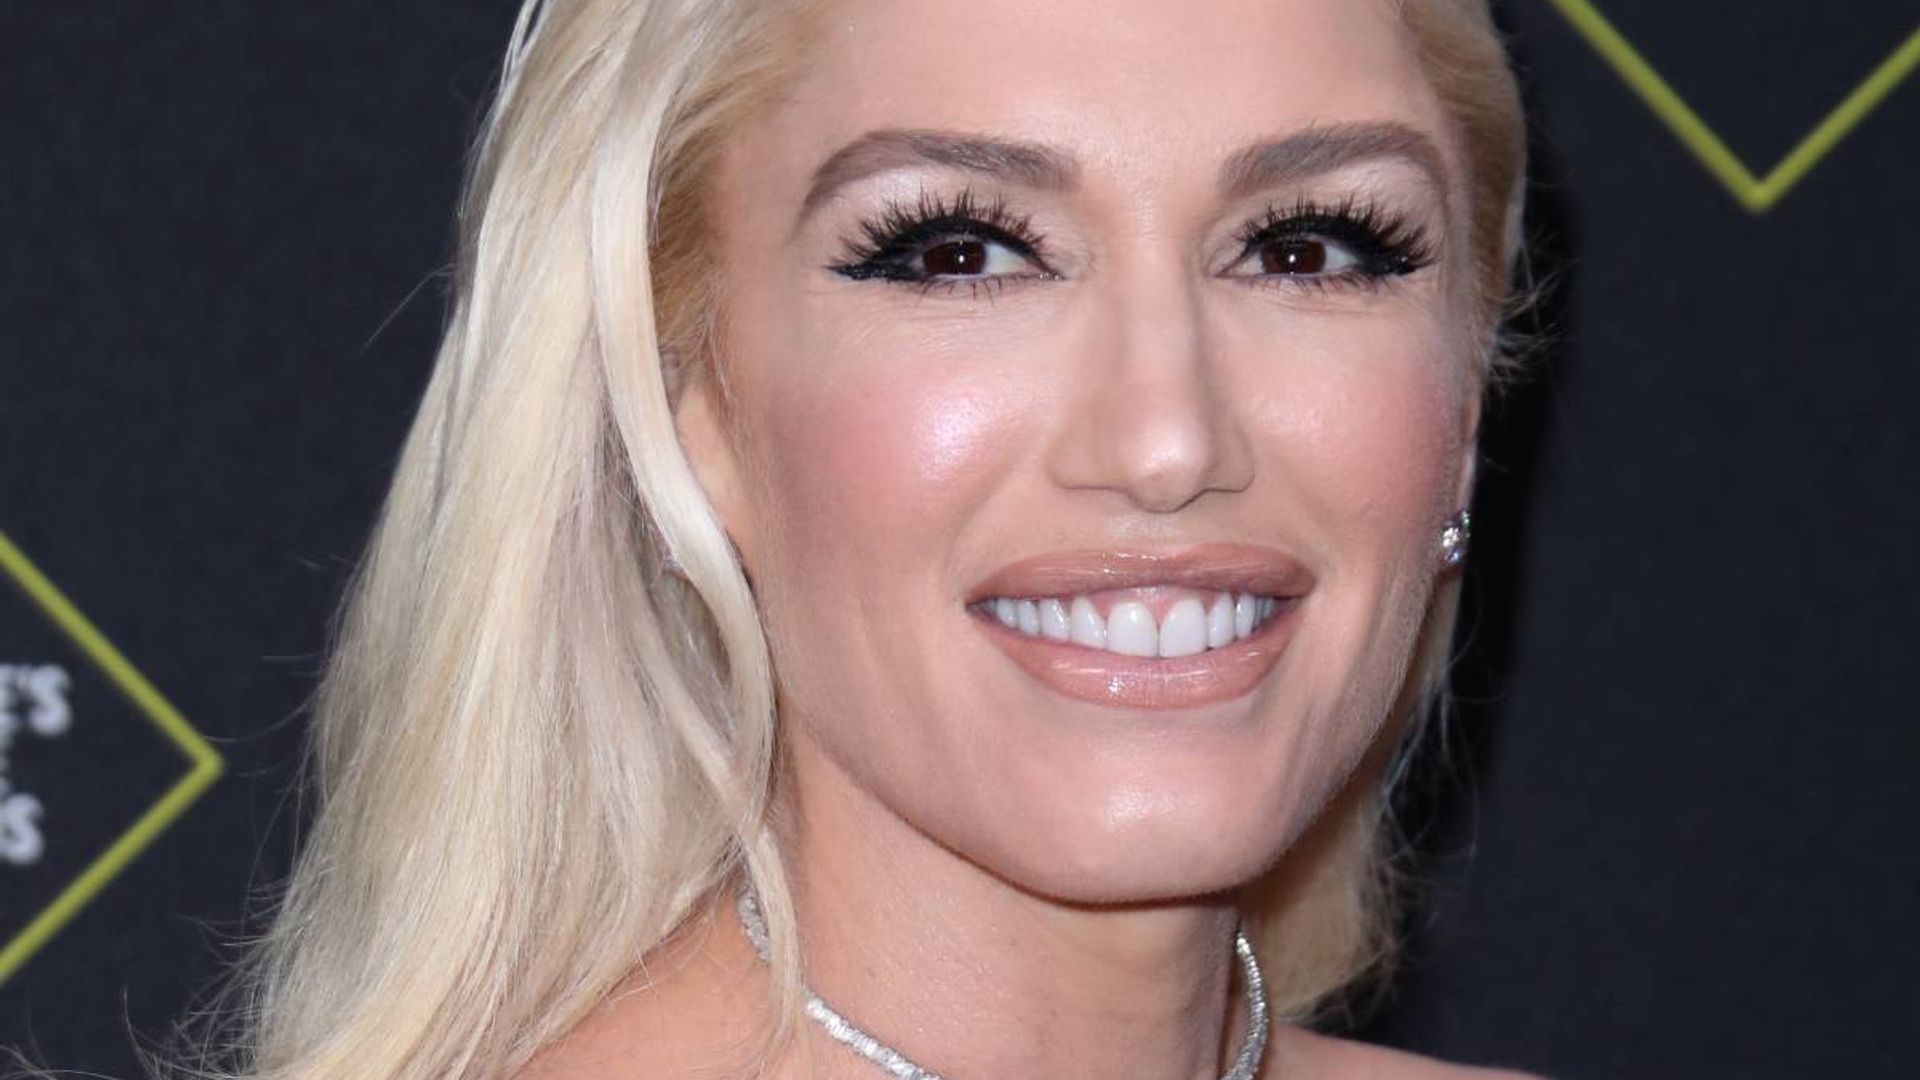 Gwen Stefani Showcases Toned Physique In Tiny Crop Top As Fans Go Wild